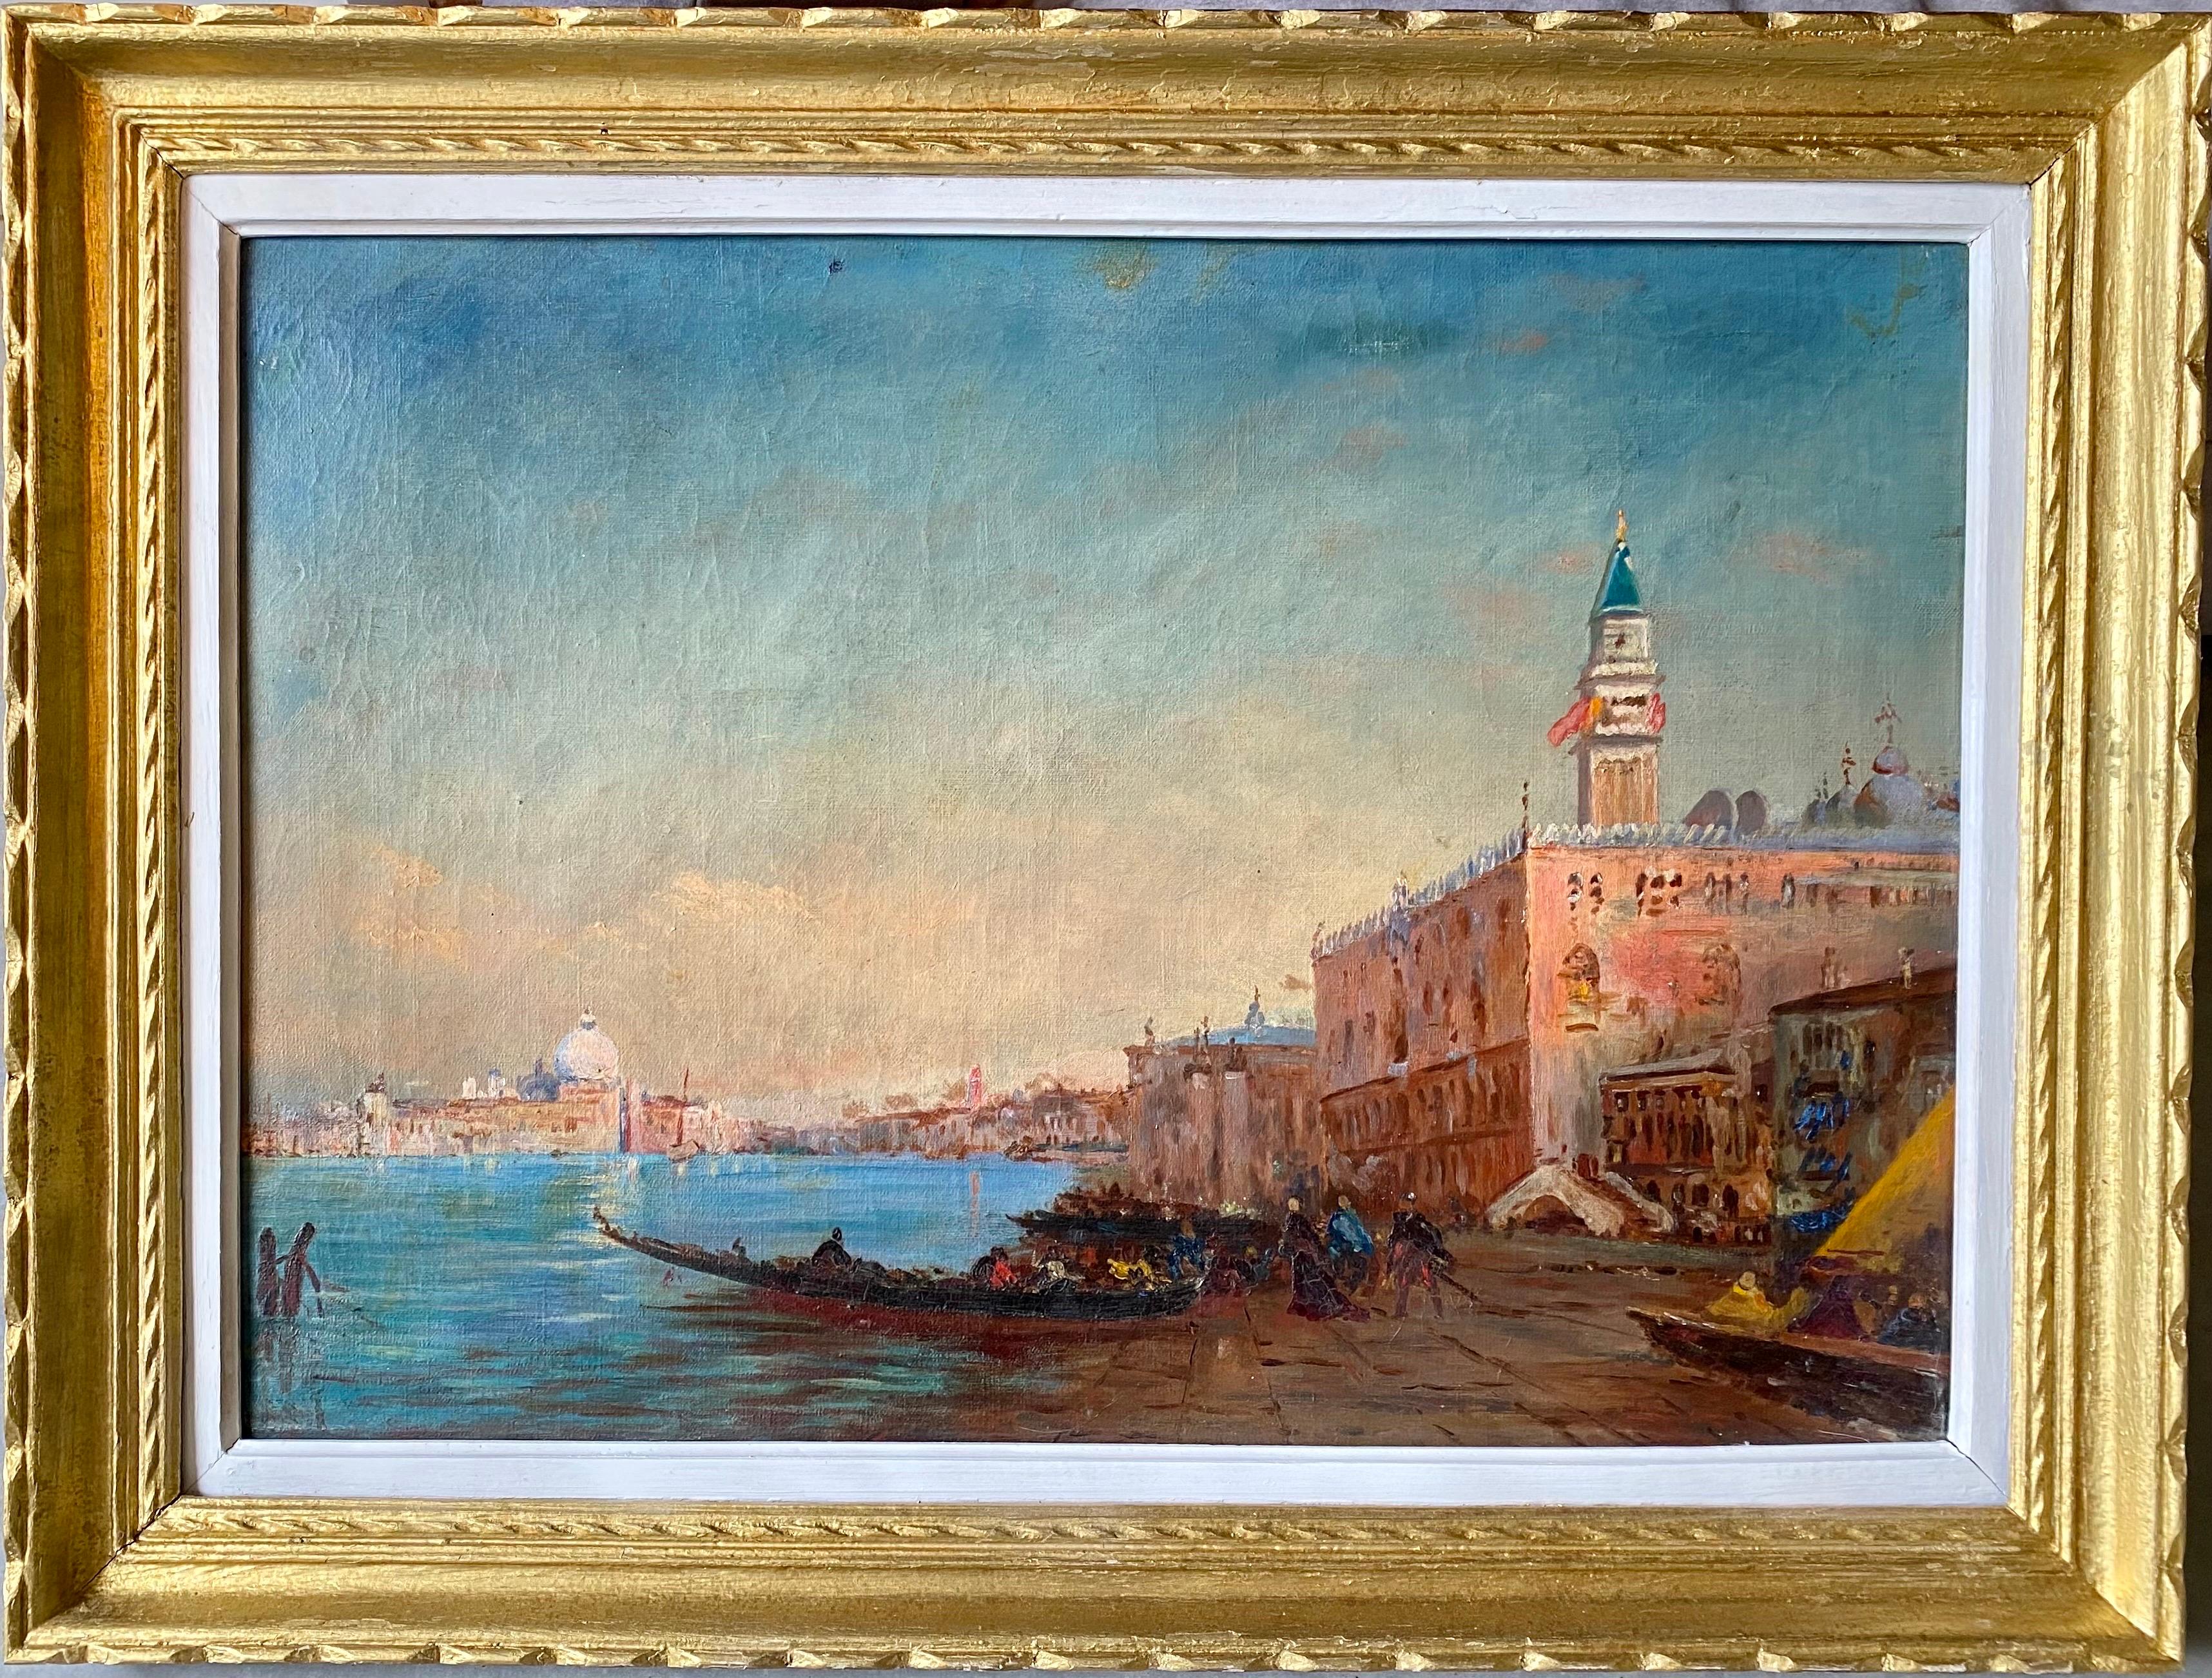 19th century French impressionist painting - Cityscape of Venice by sunset